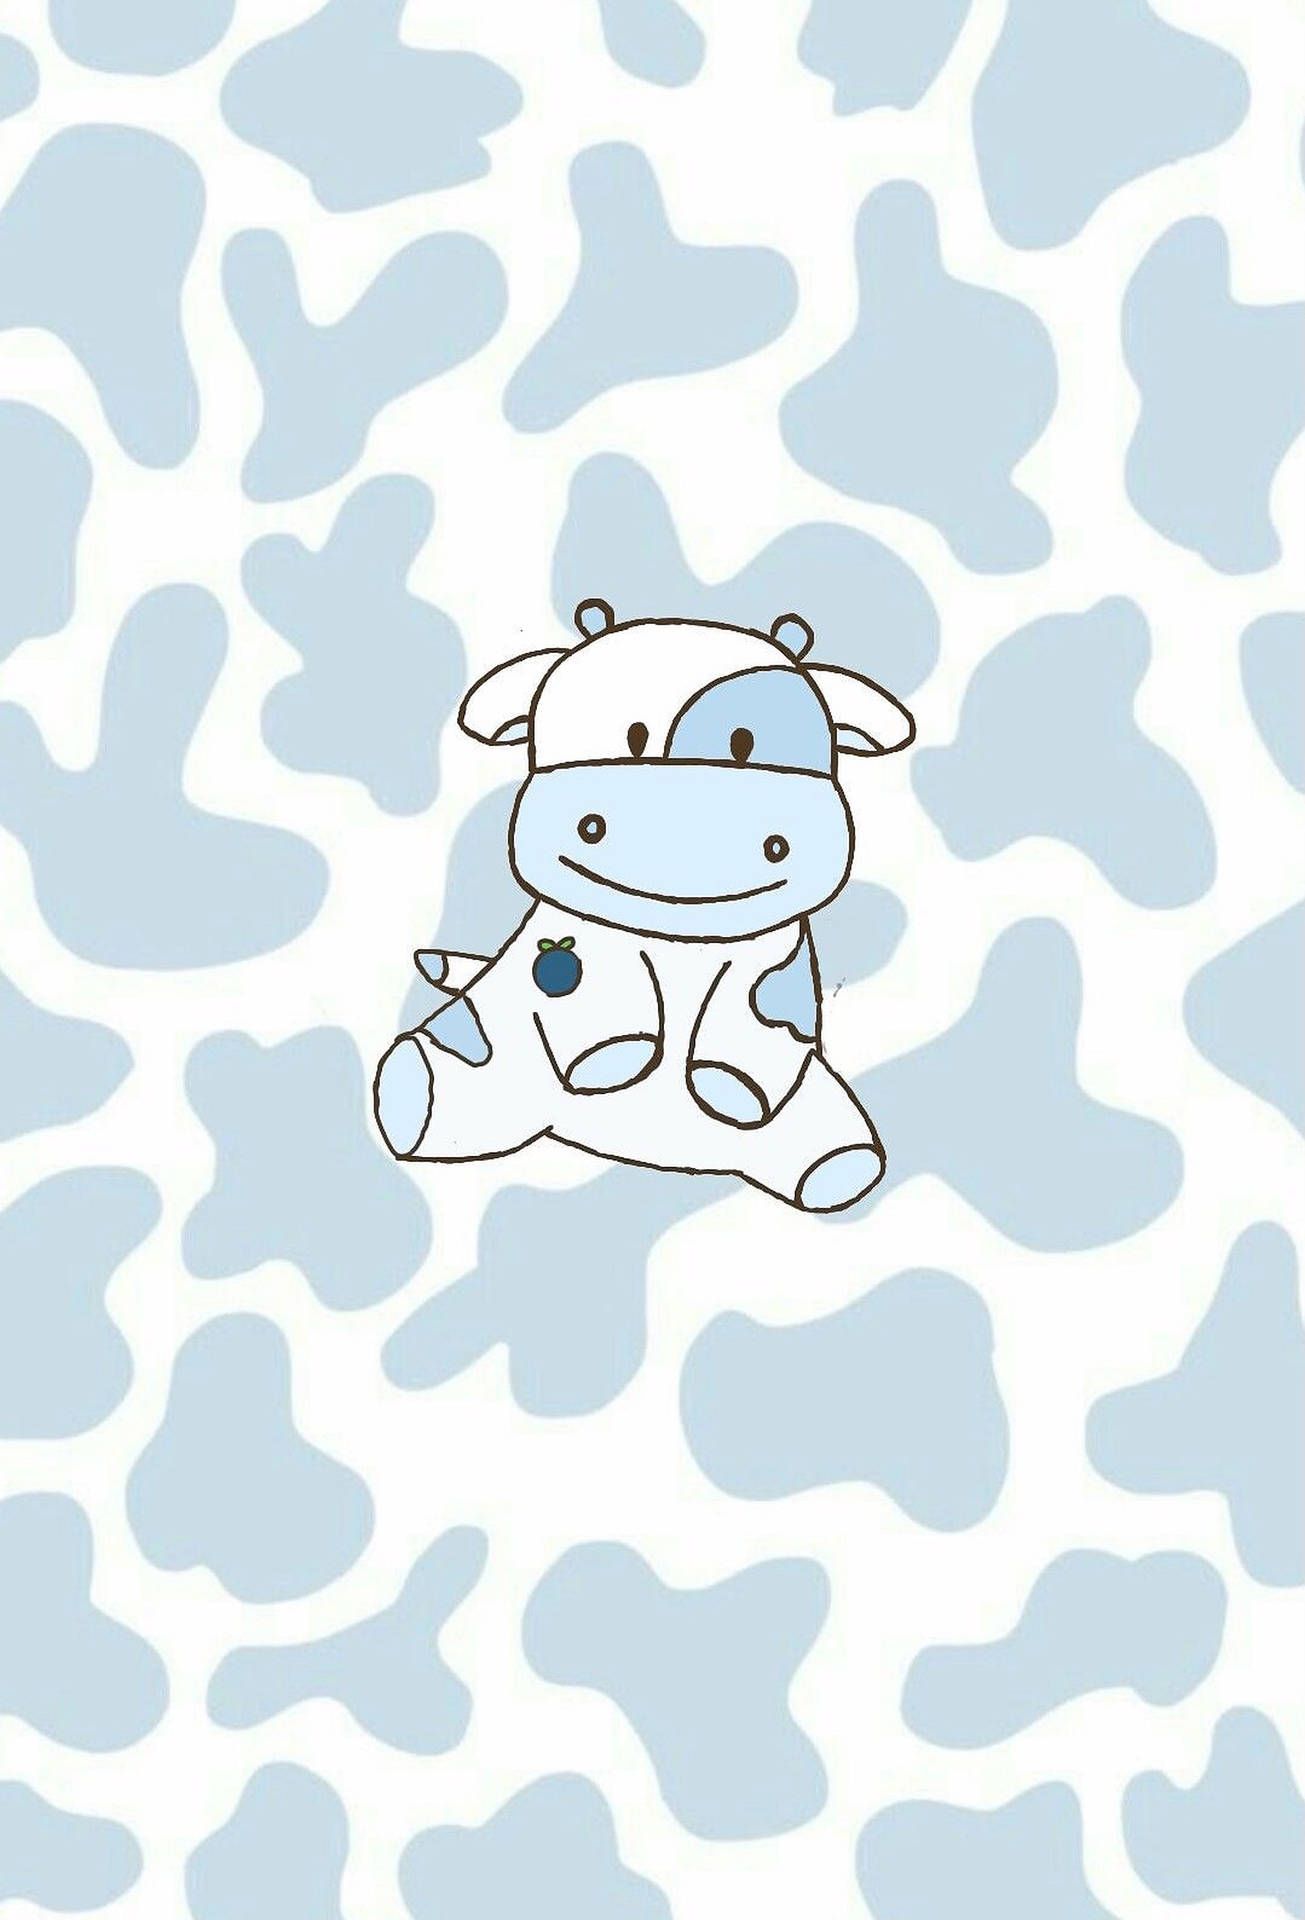 A cow on blue and white polka dot background - Cow